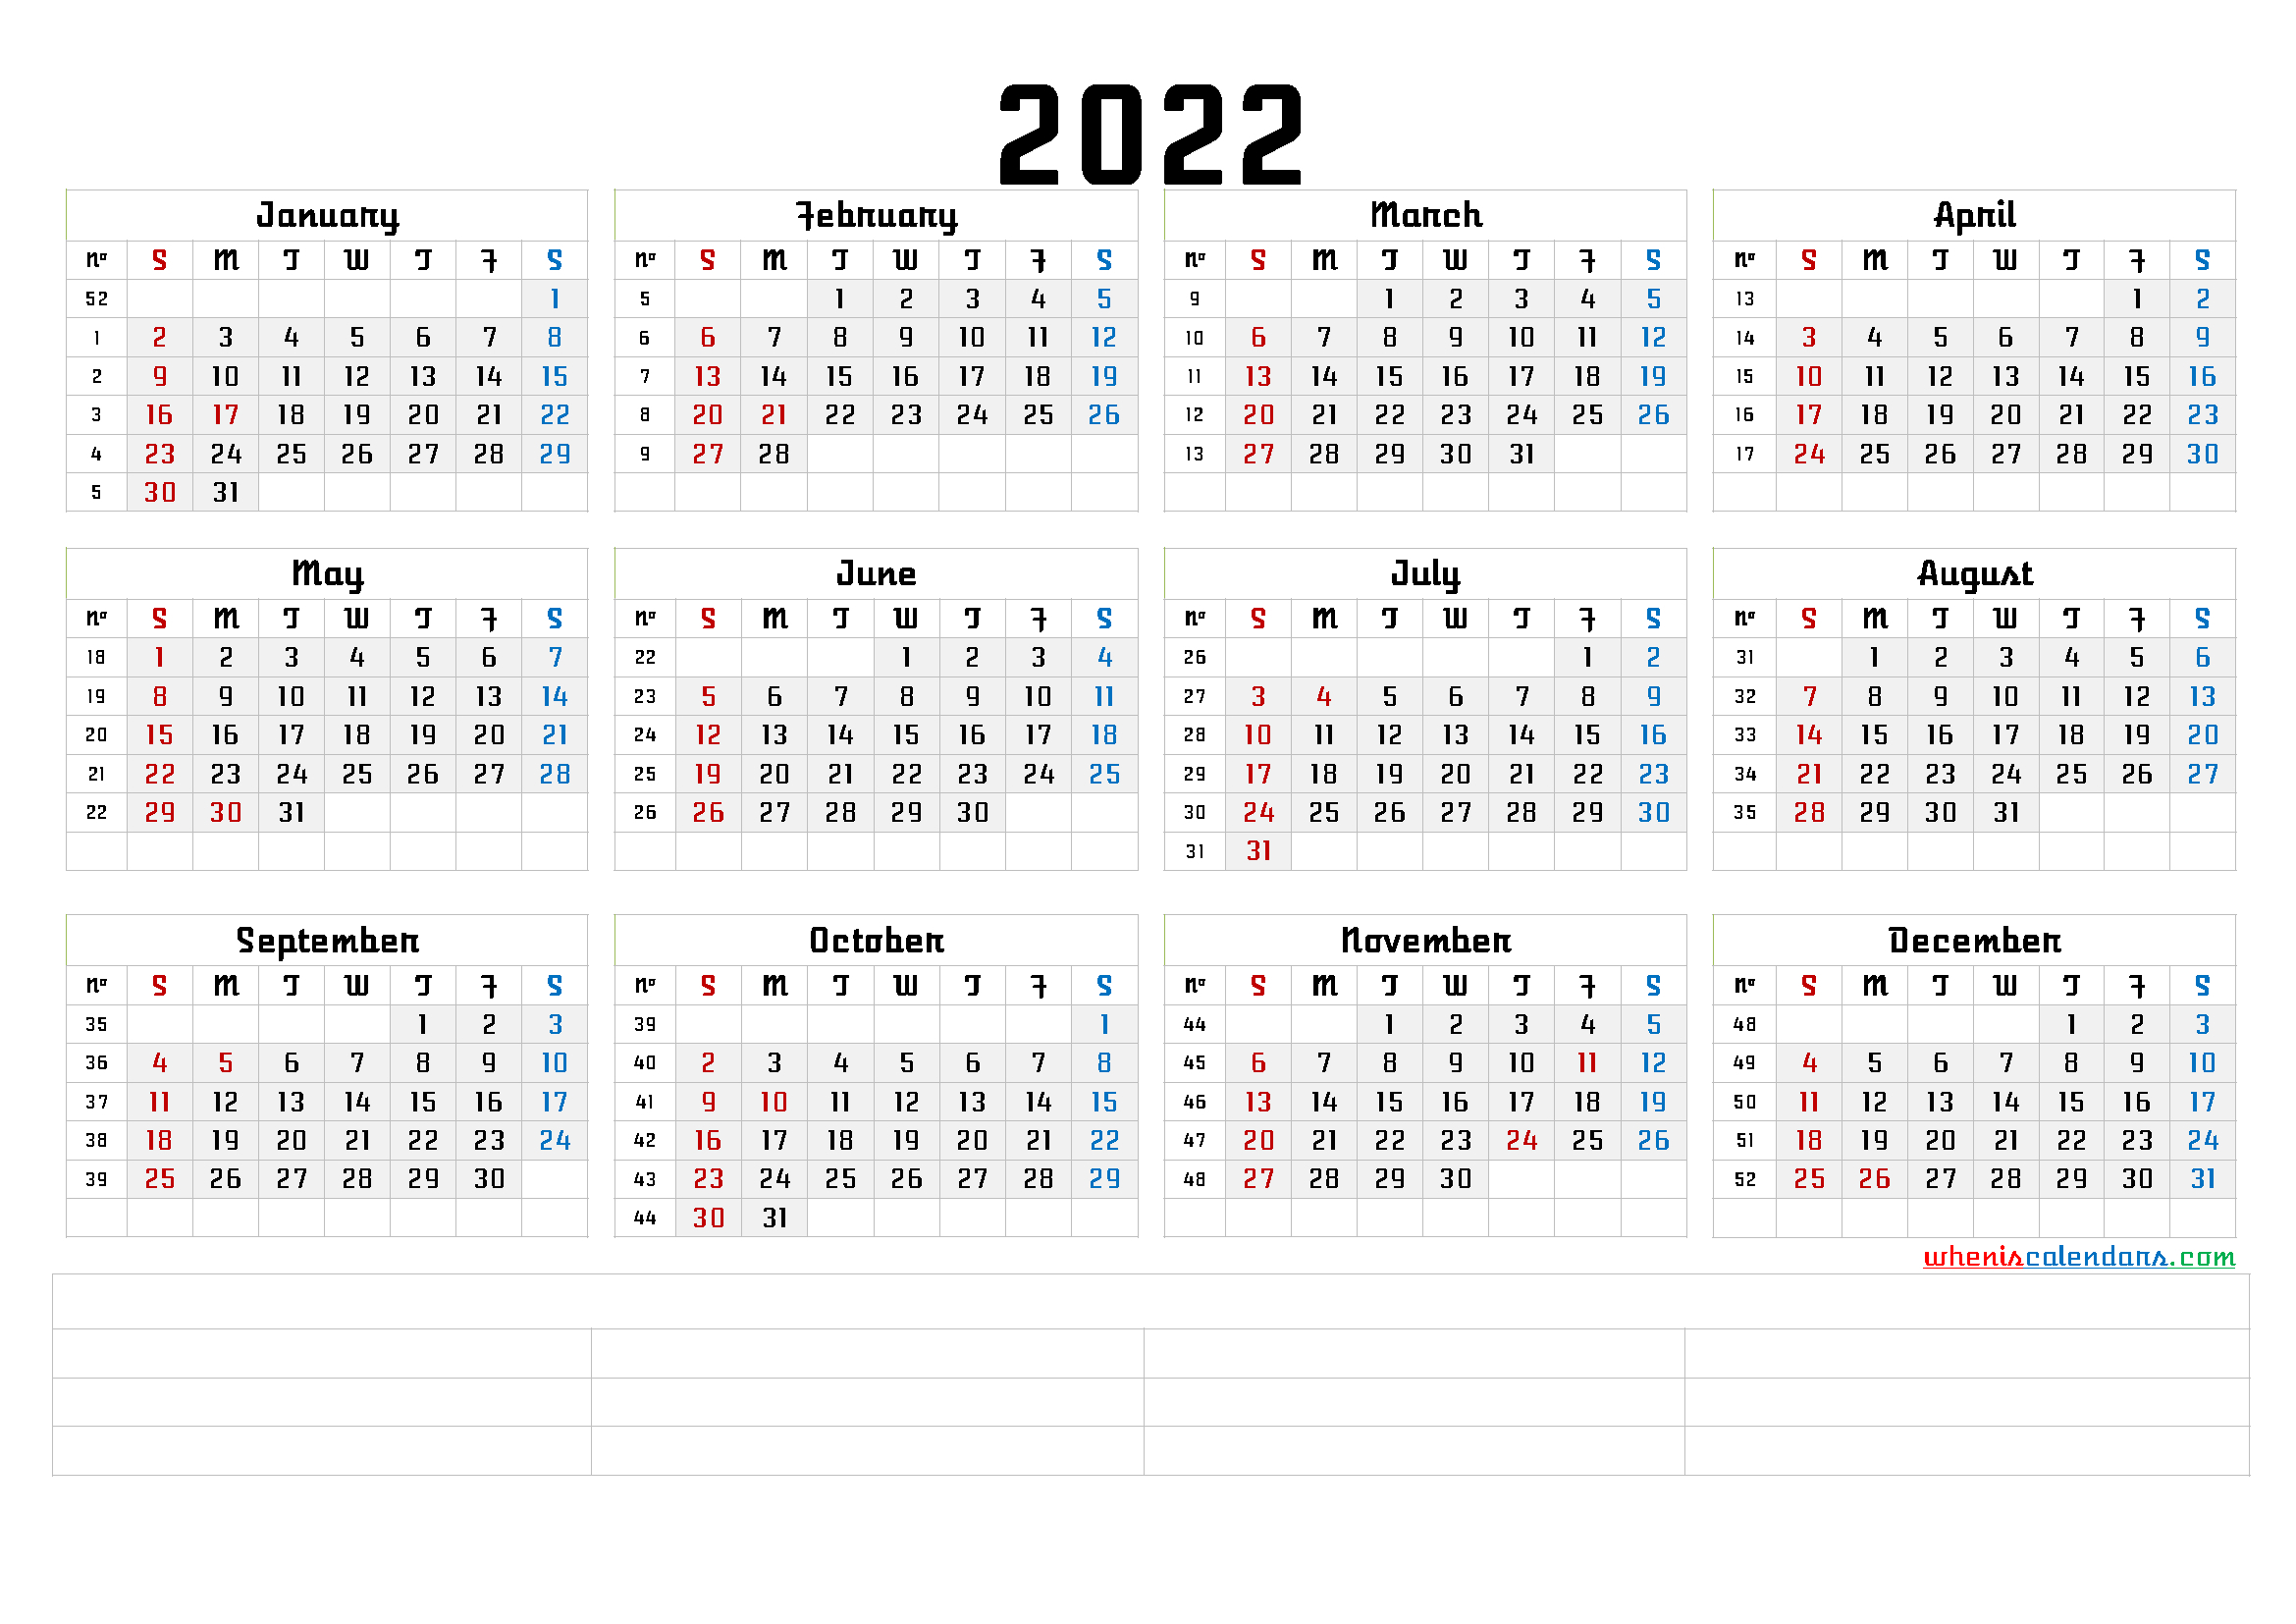 2022 Yearly Calendar Template Word  Calendraex inside Time And Date Calendar 2022 Printable